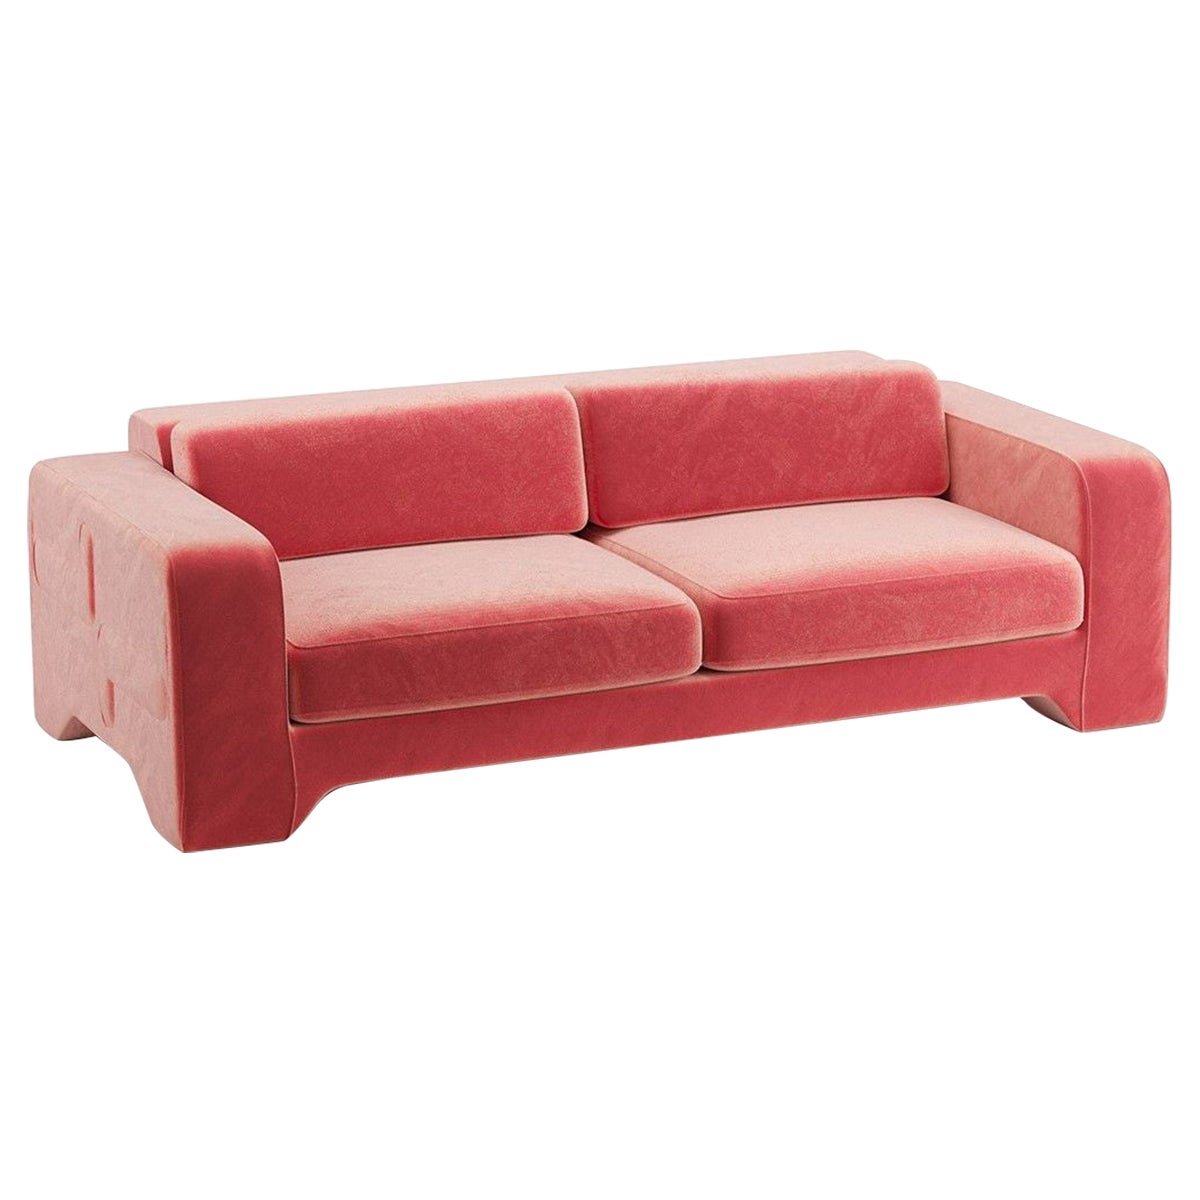 Popus Editions Giovanna 3 Seater Sofa in Pink Como Velvet Upholstery For Sale